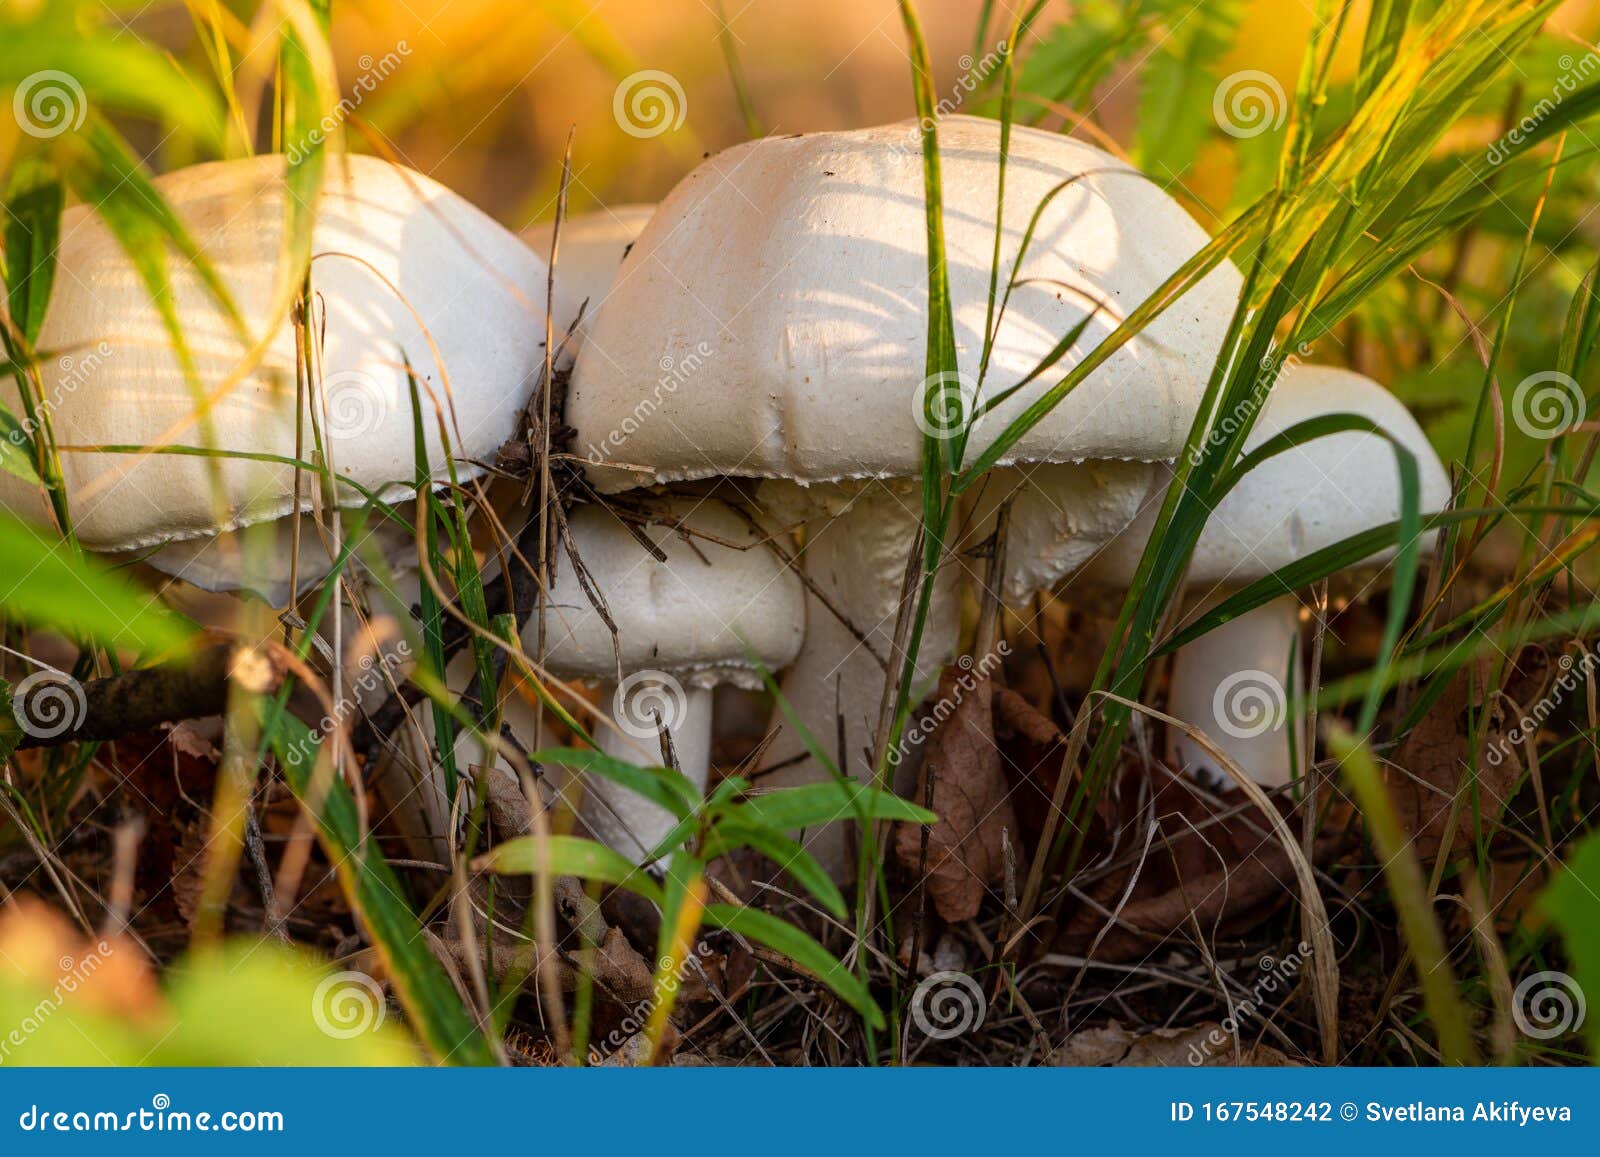 Autumn Forest Or Meadow Mushrooms In The Grass Picking Mushrooms